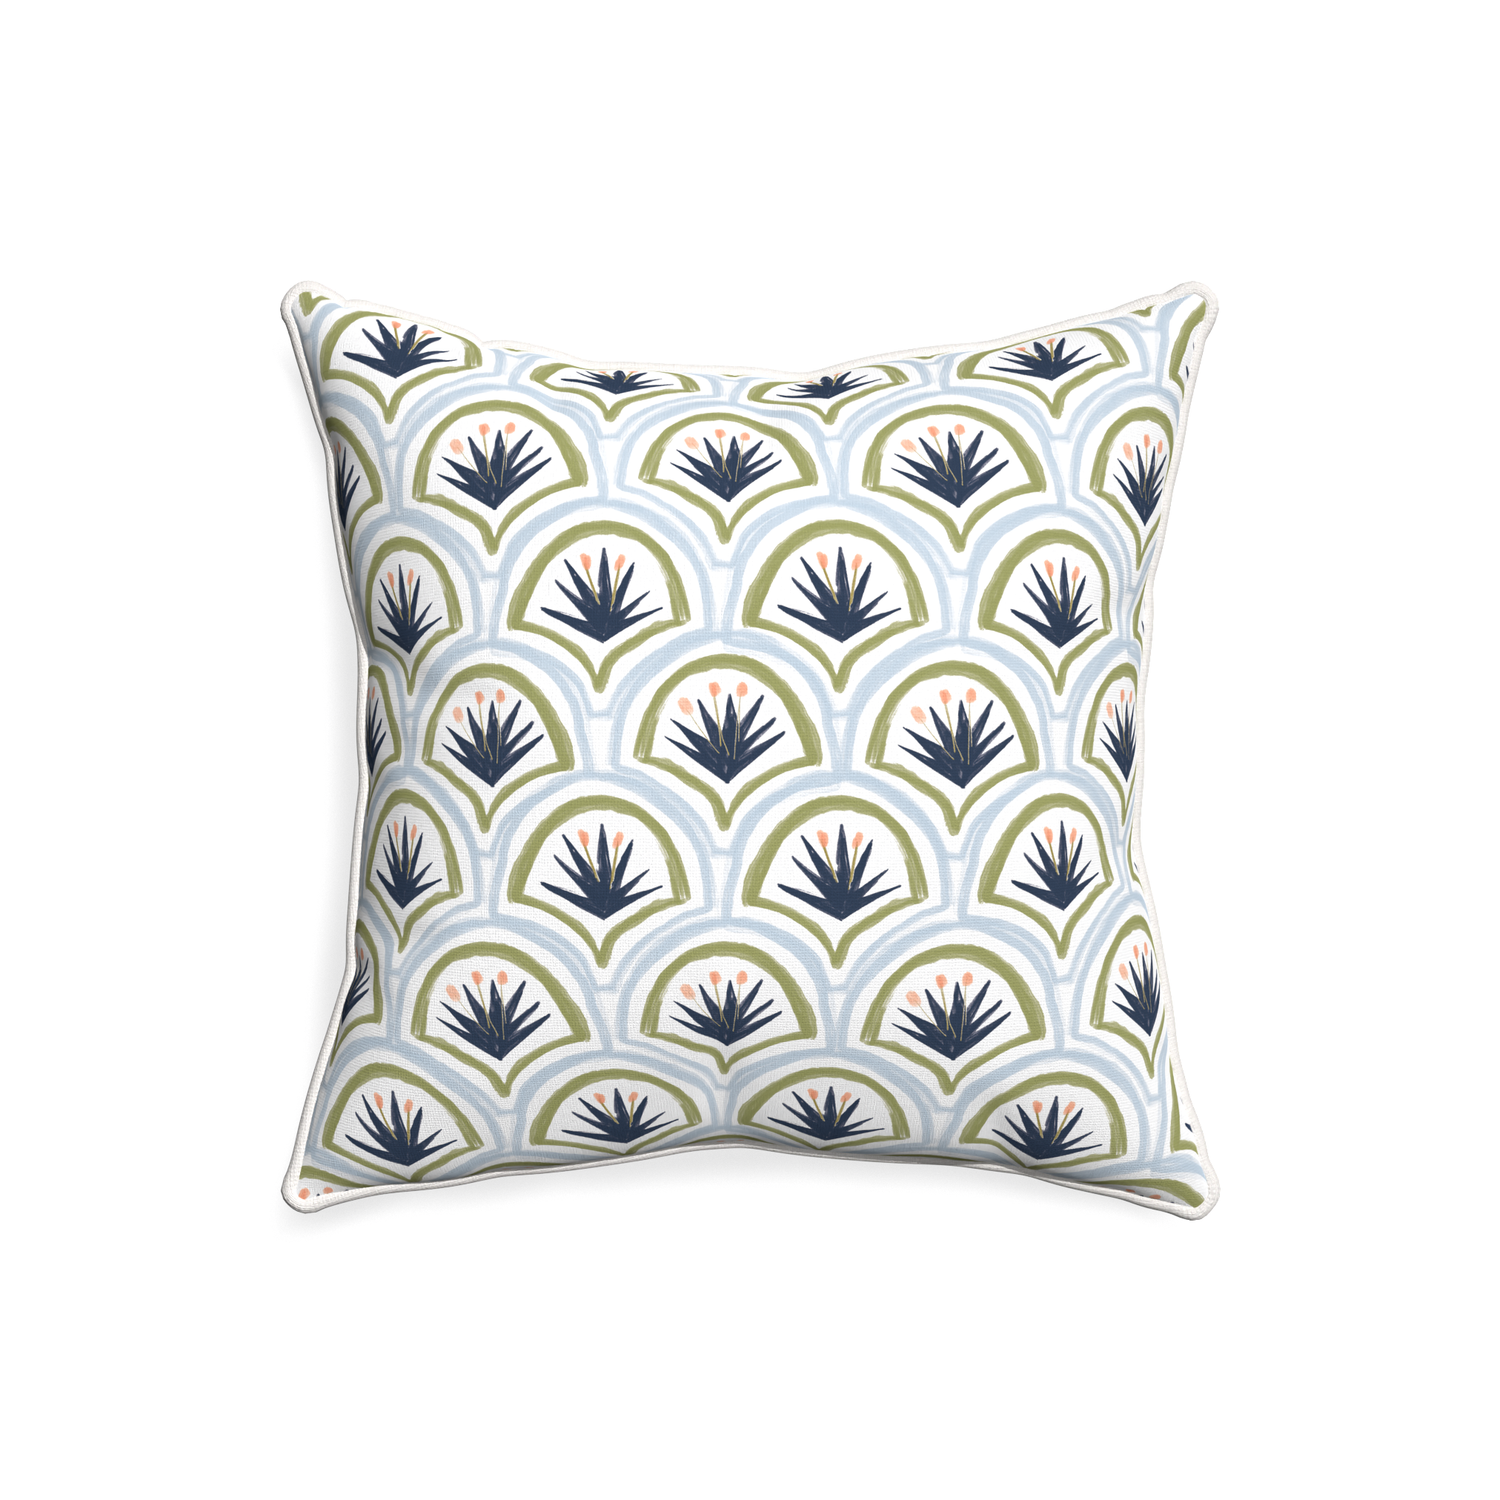 20-square thatcher midnight custom art deco palm patternpillow with snow piping on white background